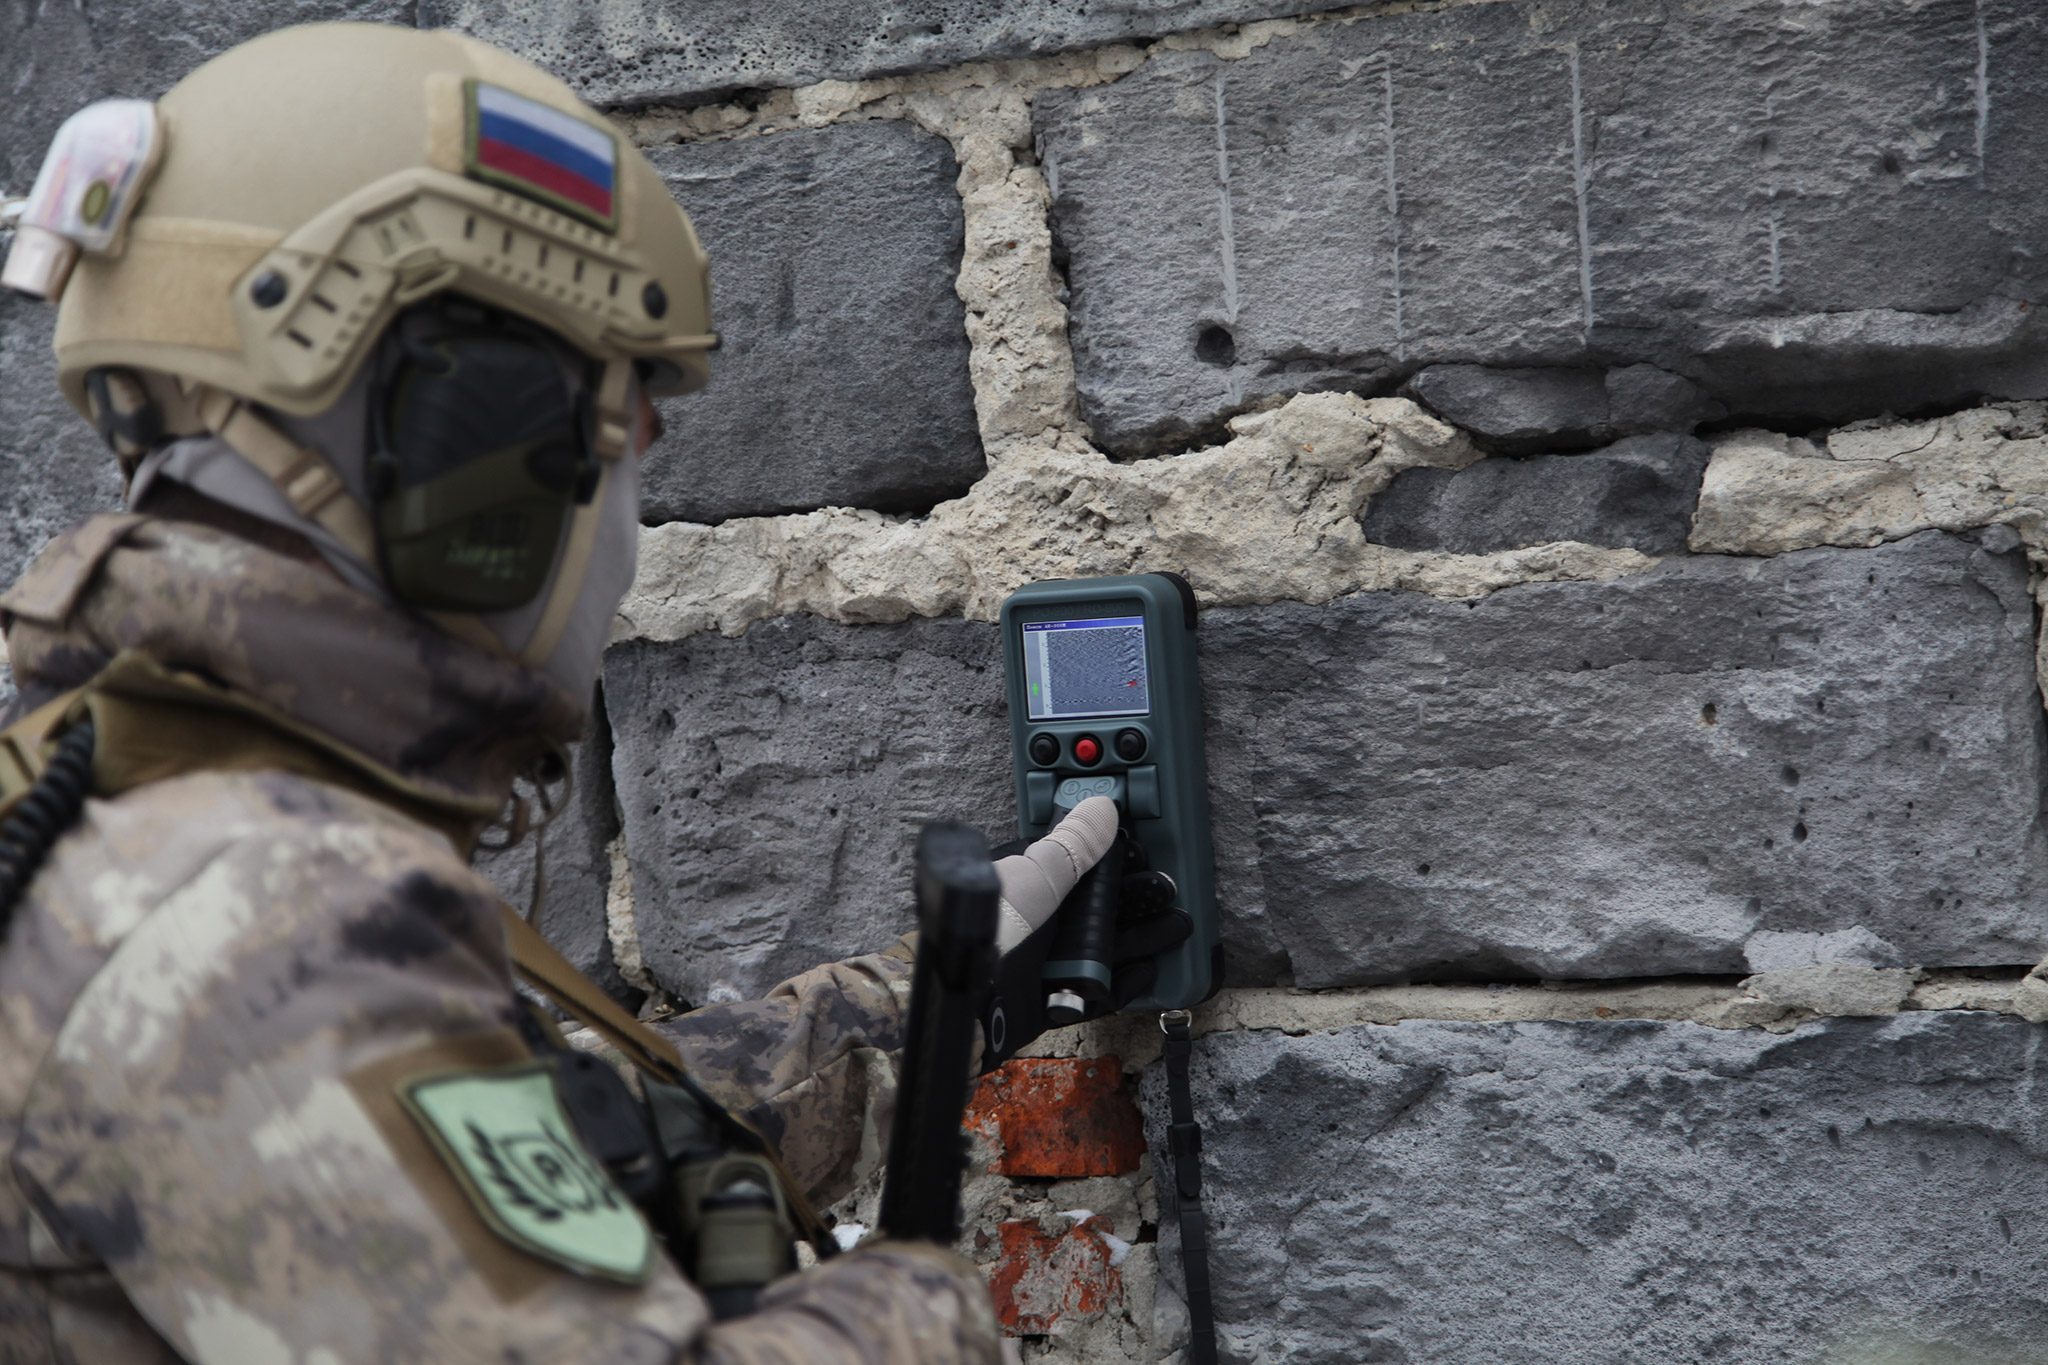 Stenovizor RO-900 radar will allow soldiers of the Russian National Guard to detect terrorists at a safe distance.